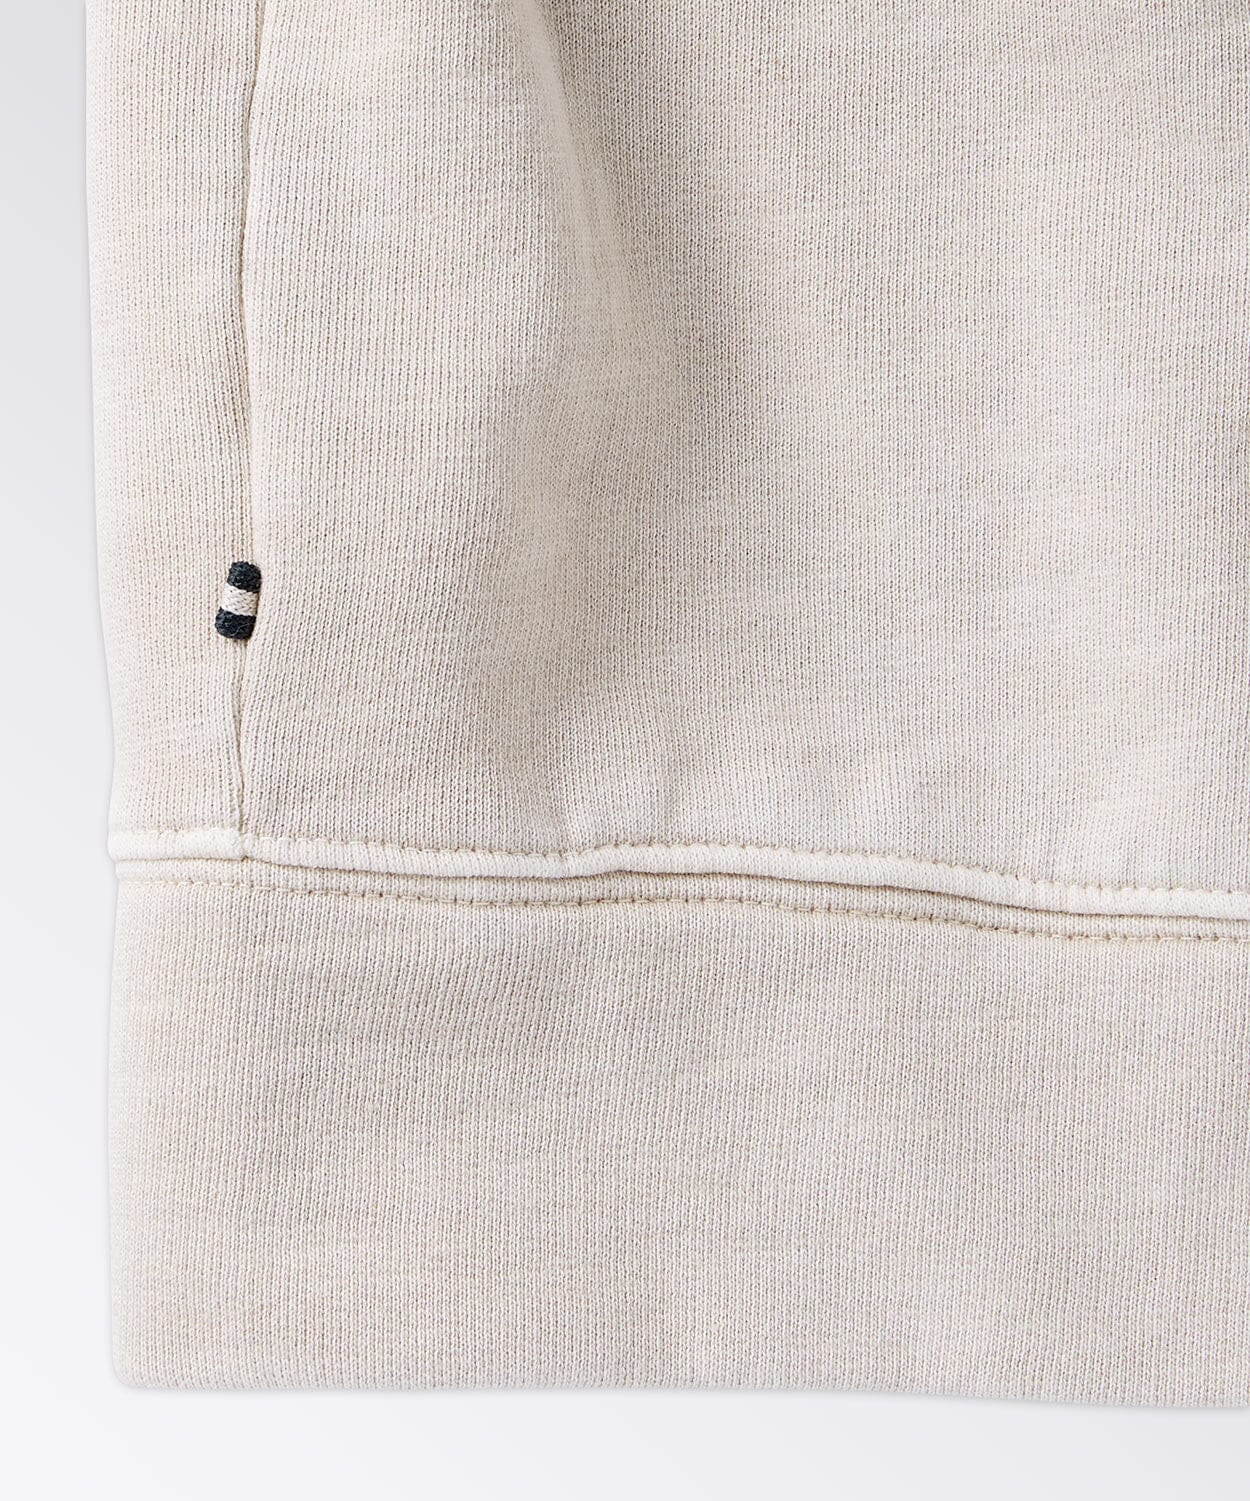 detail of a mens cardigan sweater